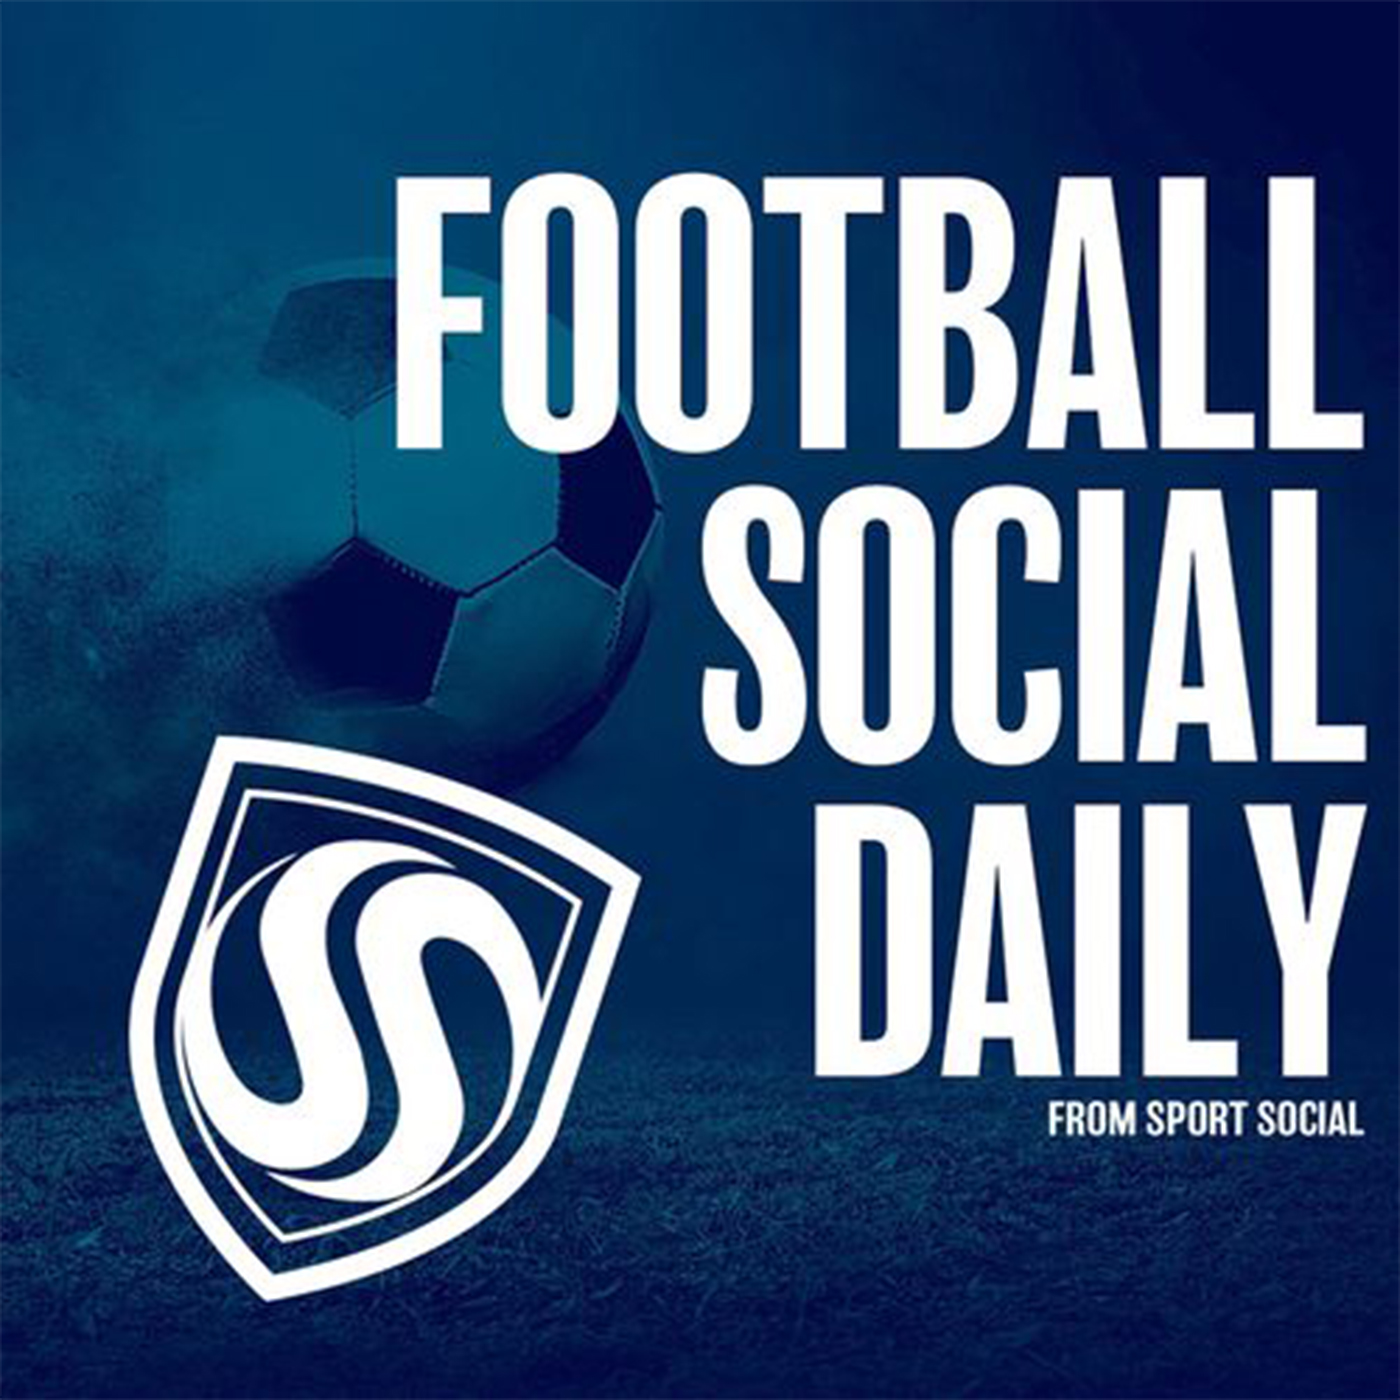 Football Social Daily launches “The Dugout”